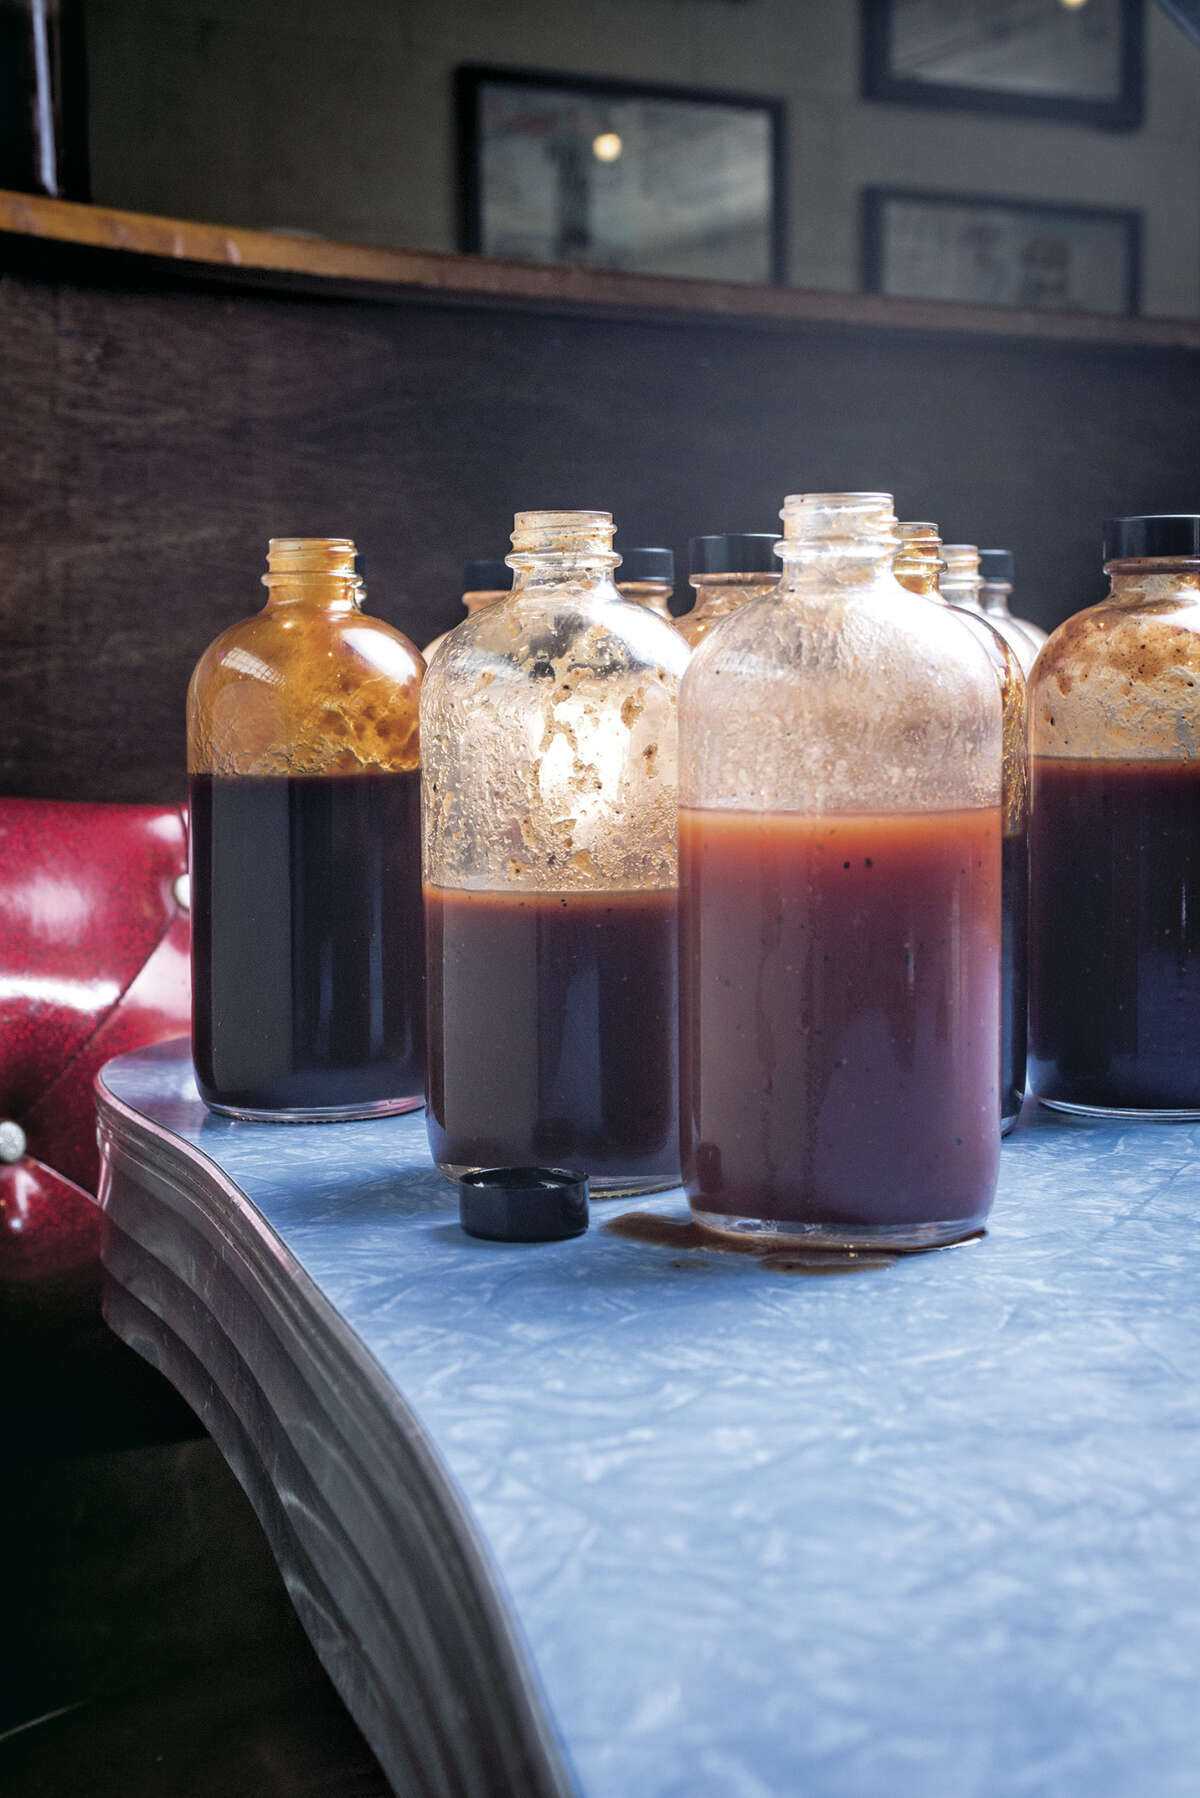 Franklin Barbecue prepares and serves a number of barbecue sauces.